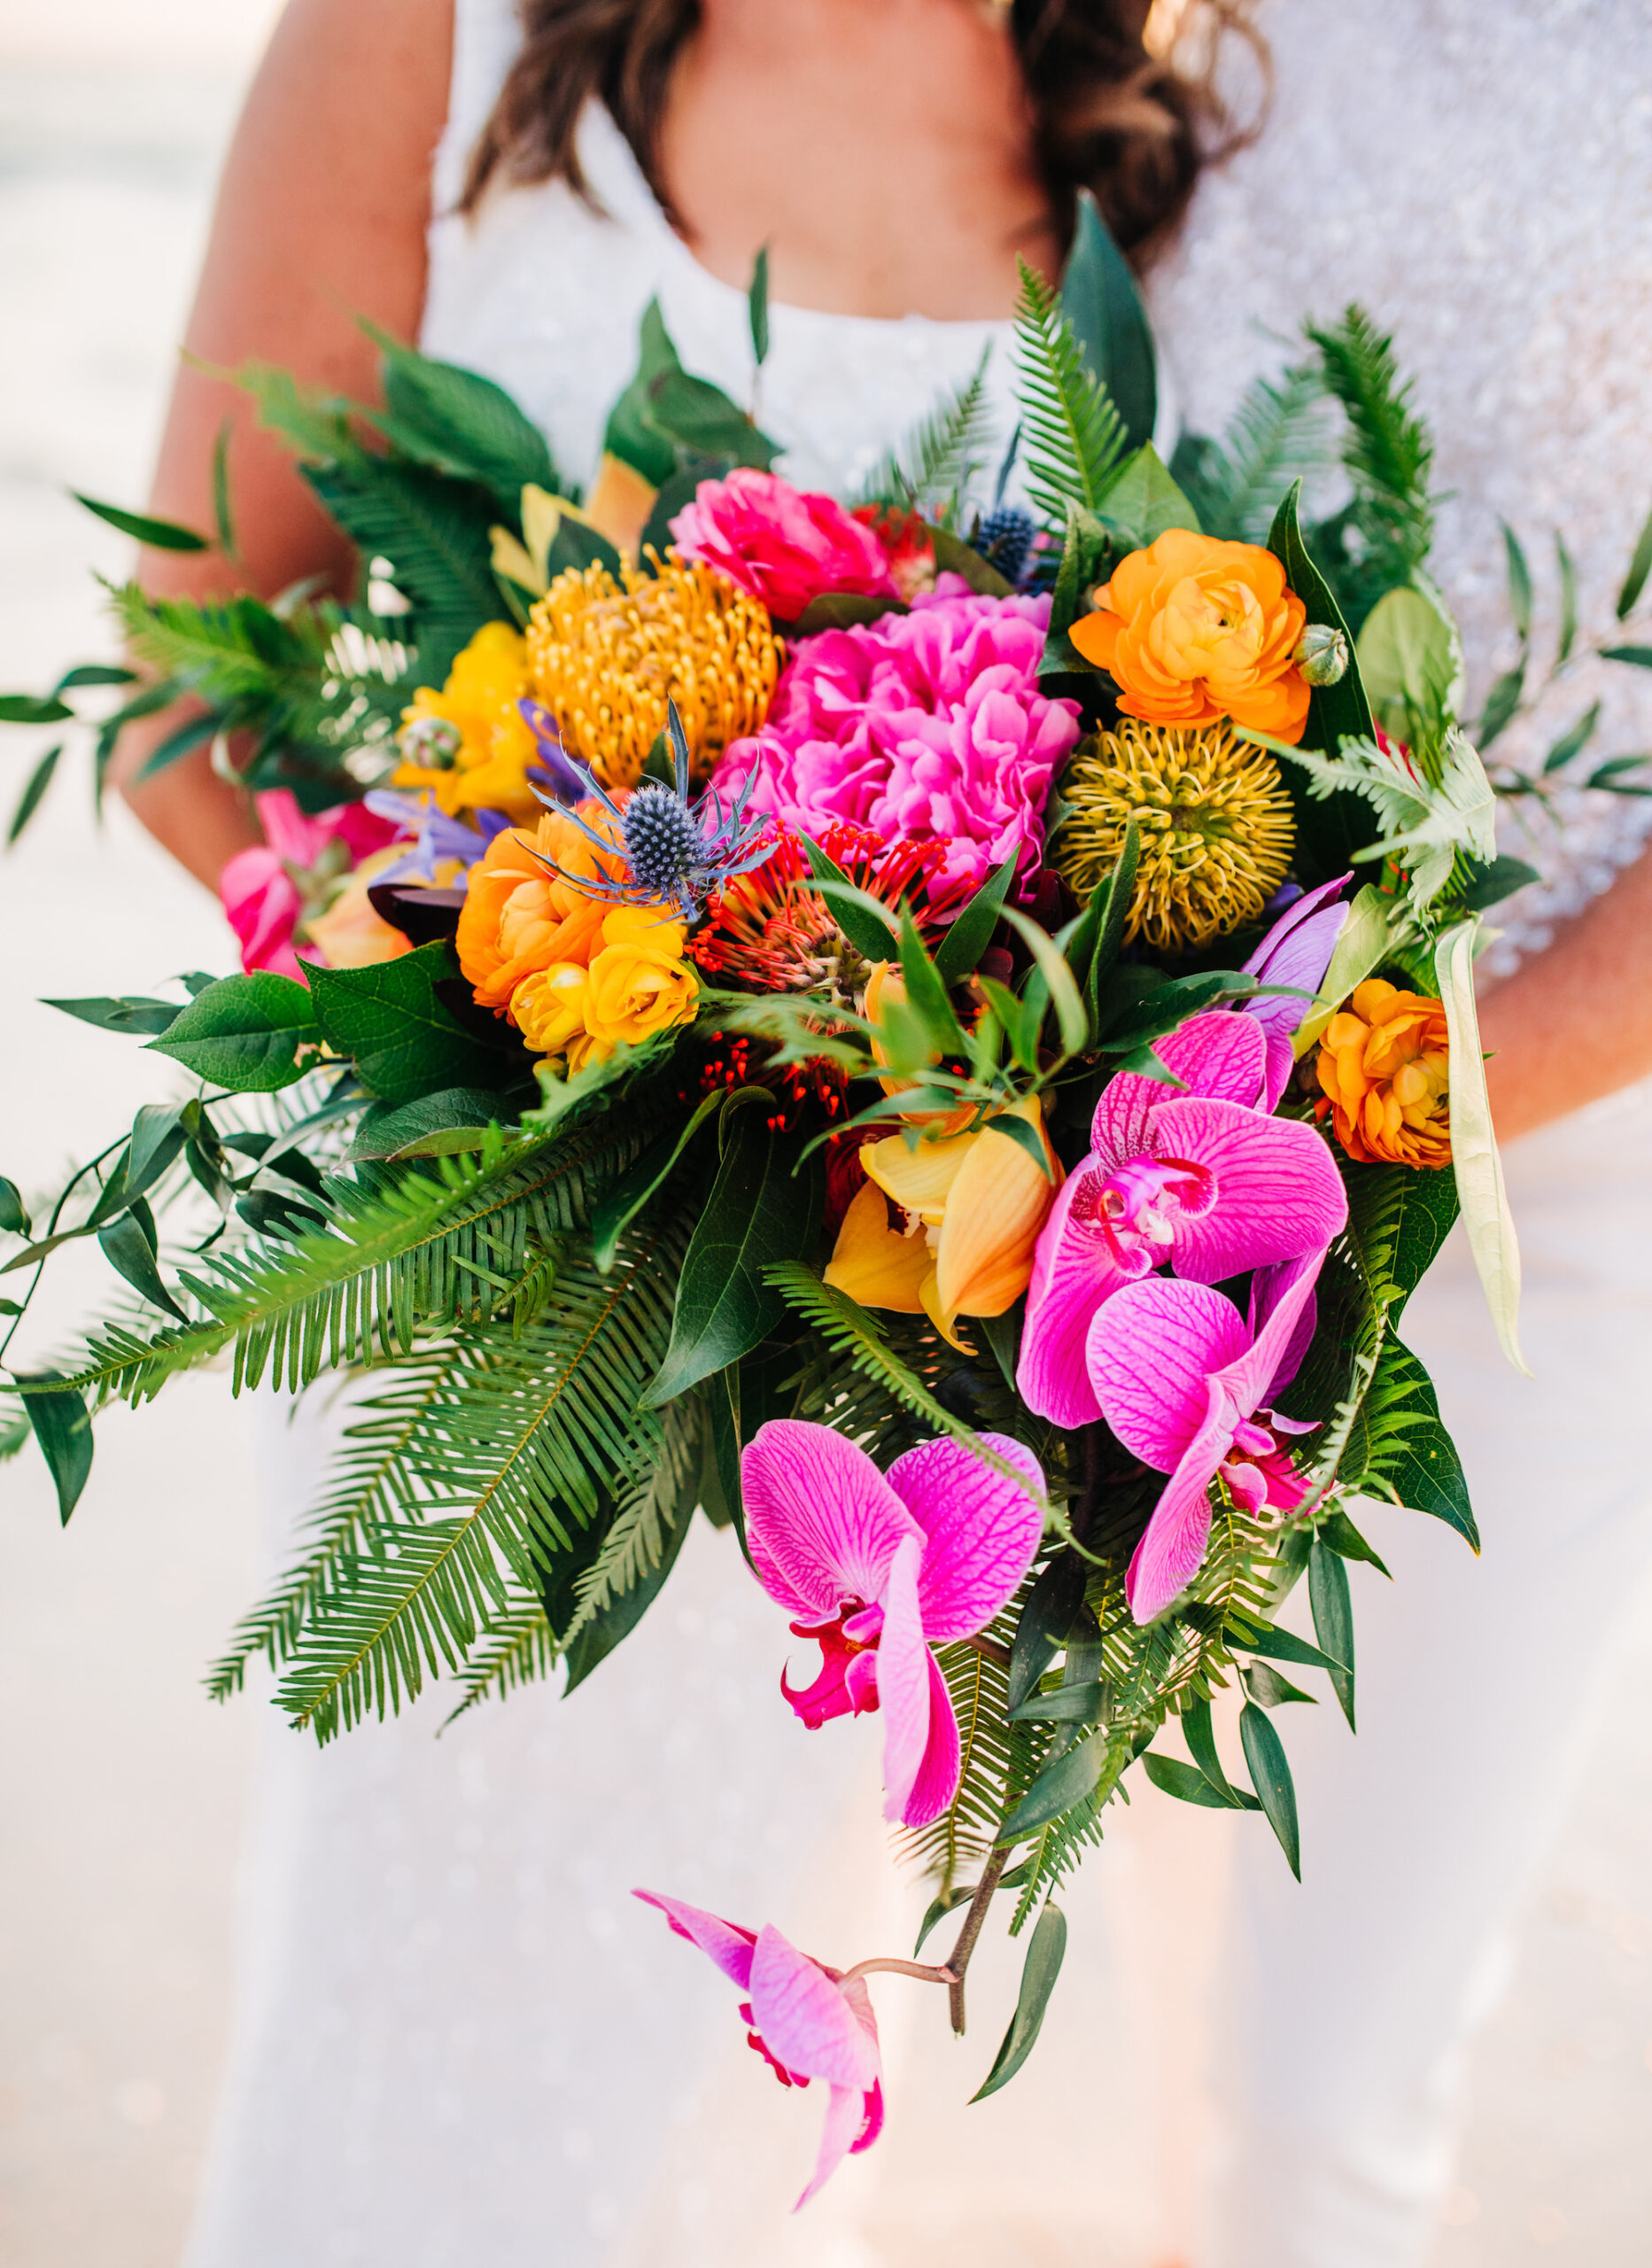 Vibrant Colorful Same Sex Wedding, Pink Orchids, Yellow Pincushions, Orange Roses, Greenery, Palm Leaves Floral Bouquet